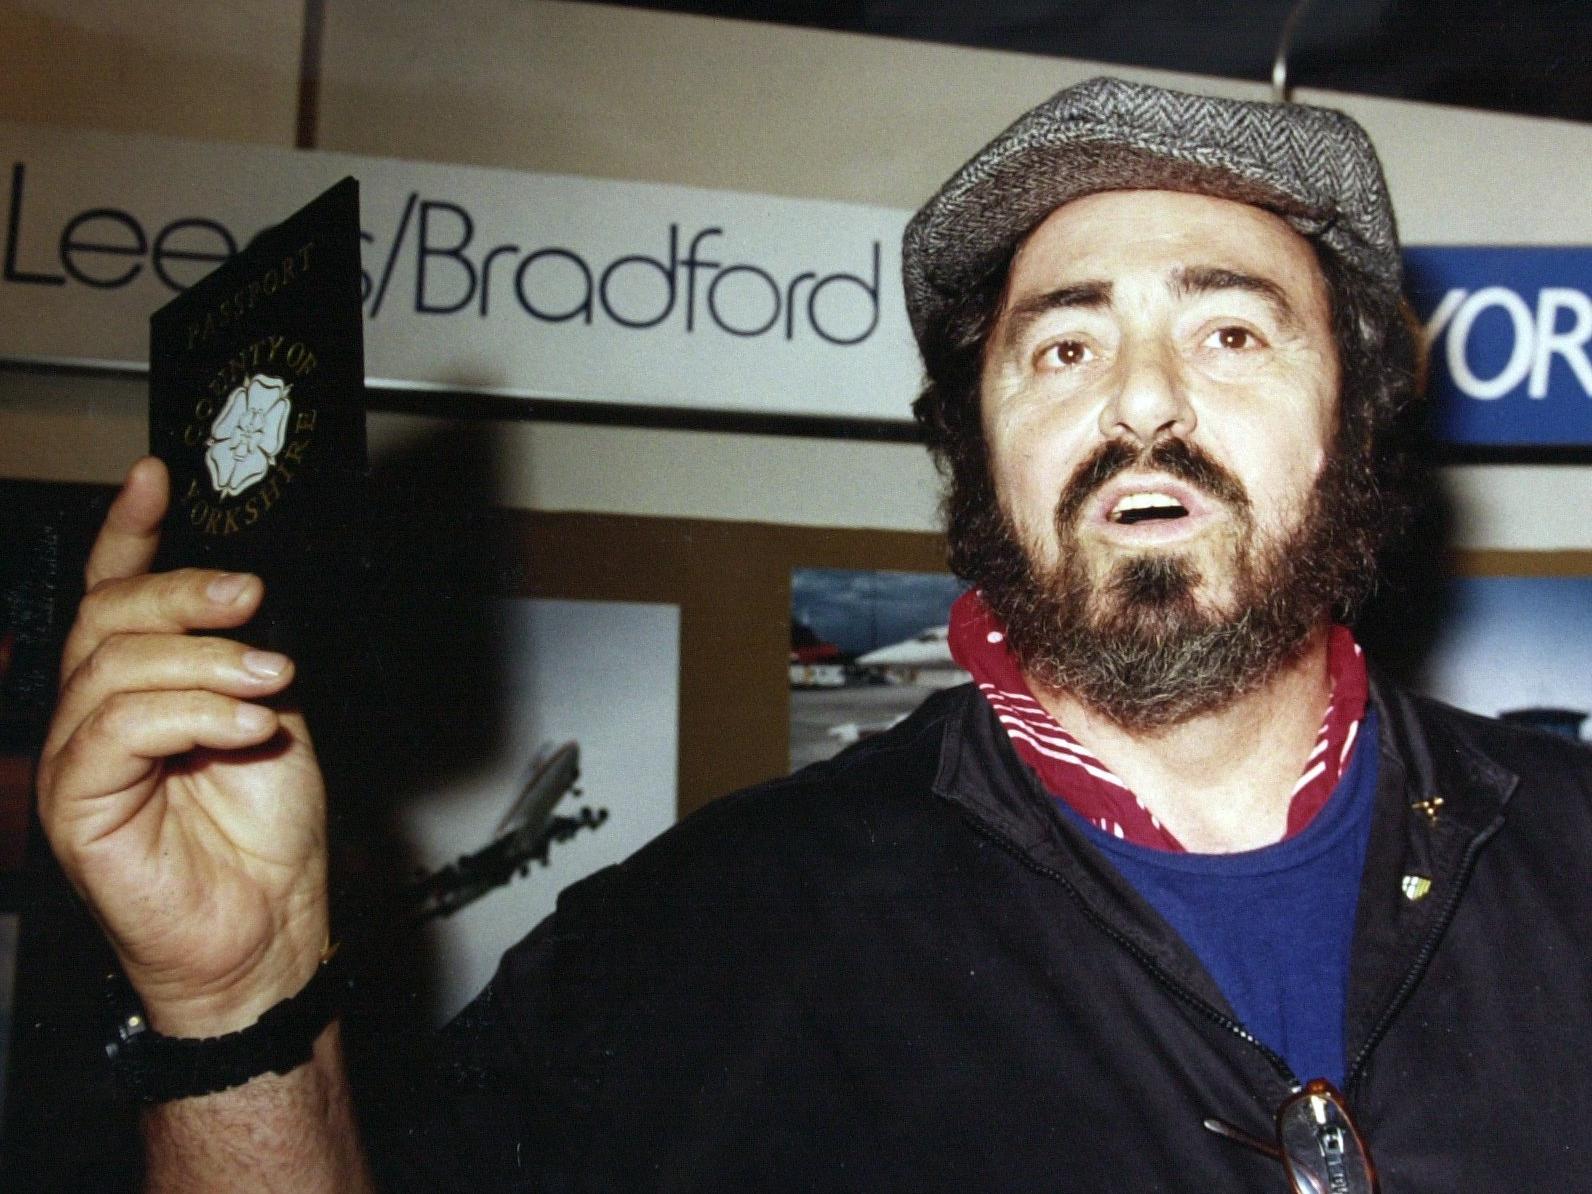 Opera legend Pavarotti was given a Yorkshire passport when he arrived at Leeds and Bradford Airport.